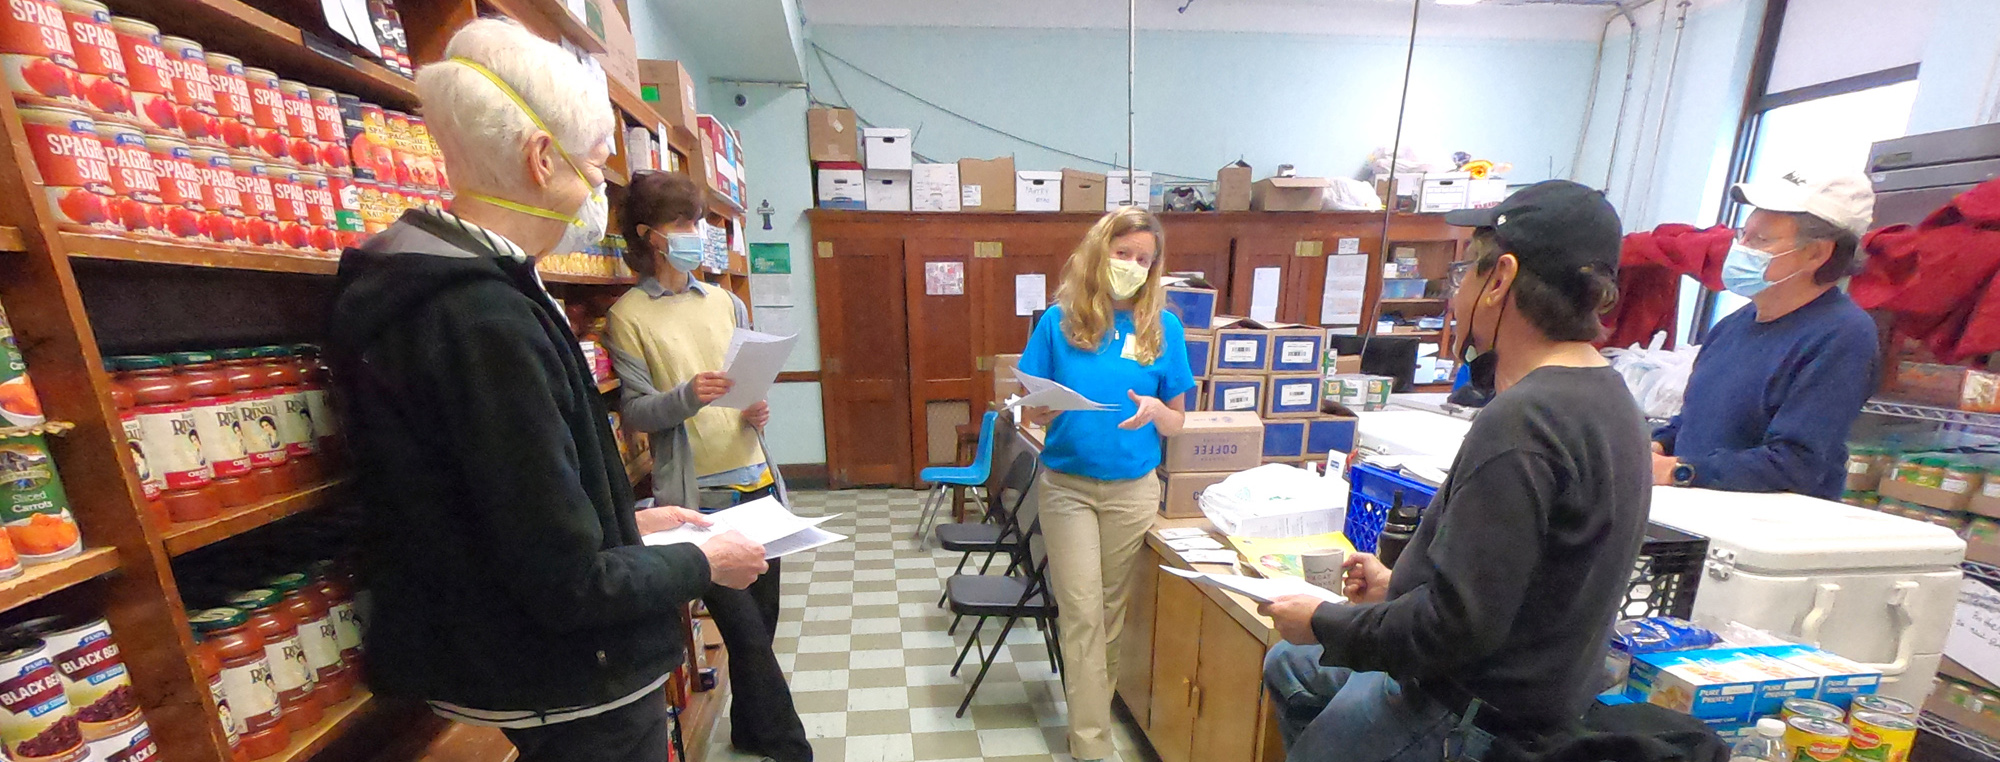 Backus Provides Nutrition Training for Norwich Food Pantry Staff